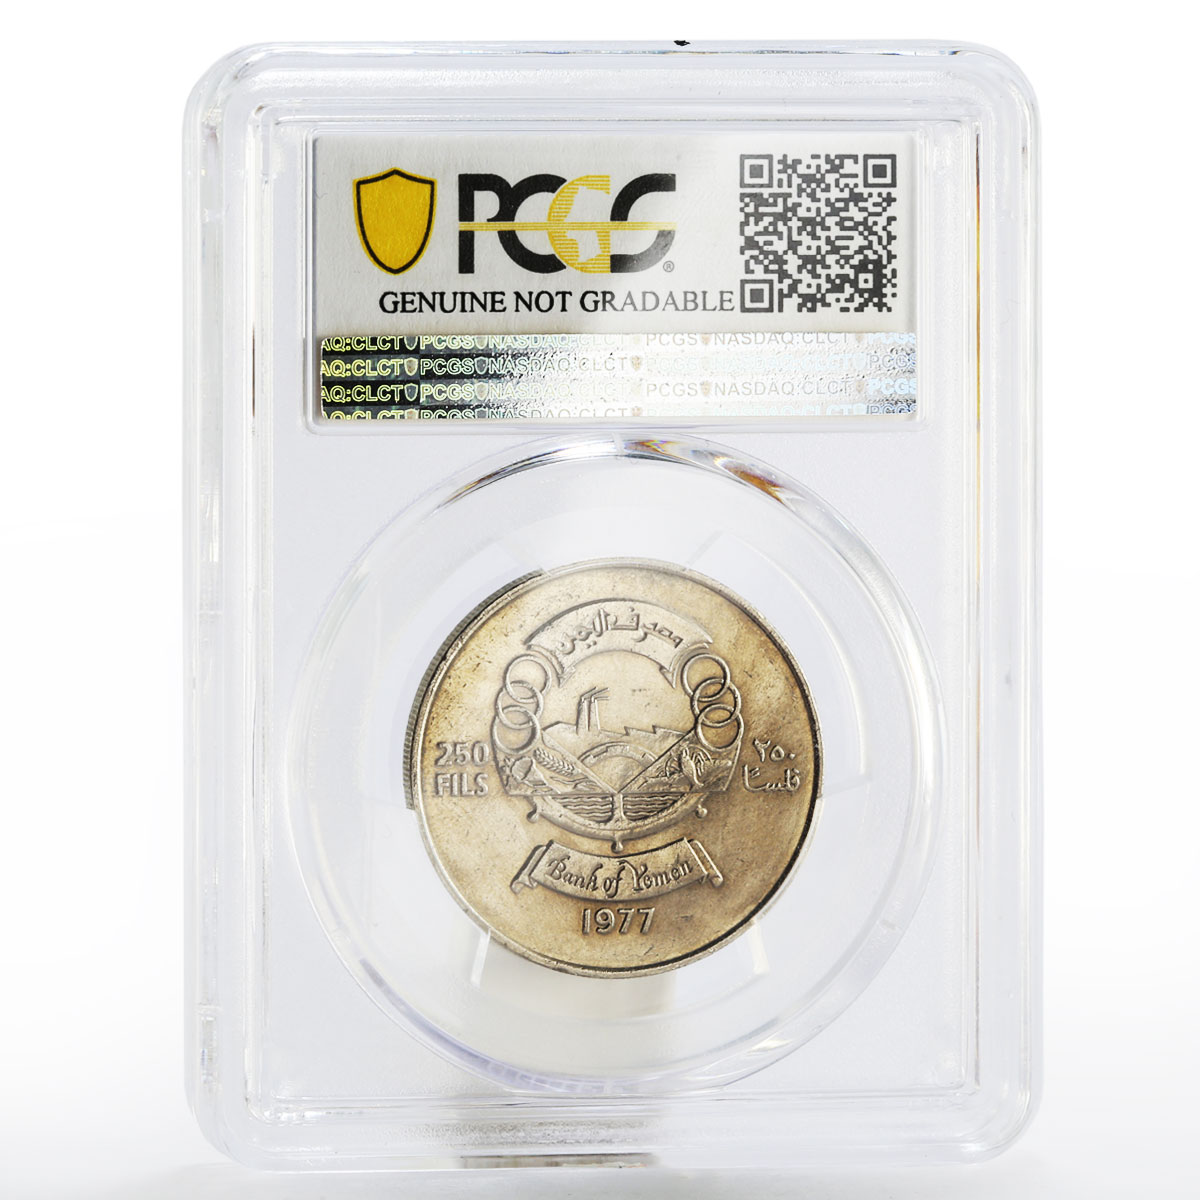 Yemen 250 fils Fortress 10th Anniversary of Independence UNC PCGS coin 1977